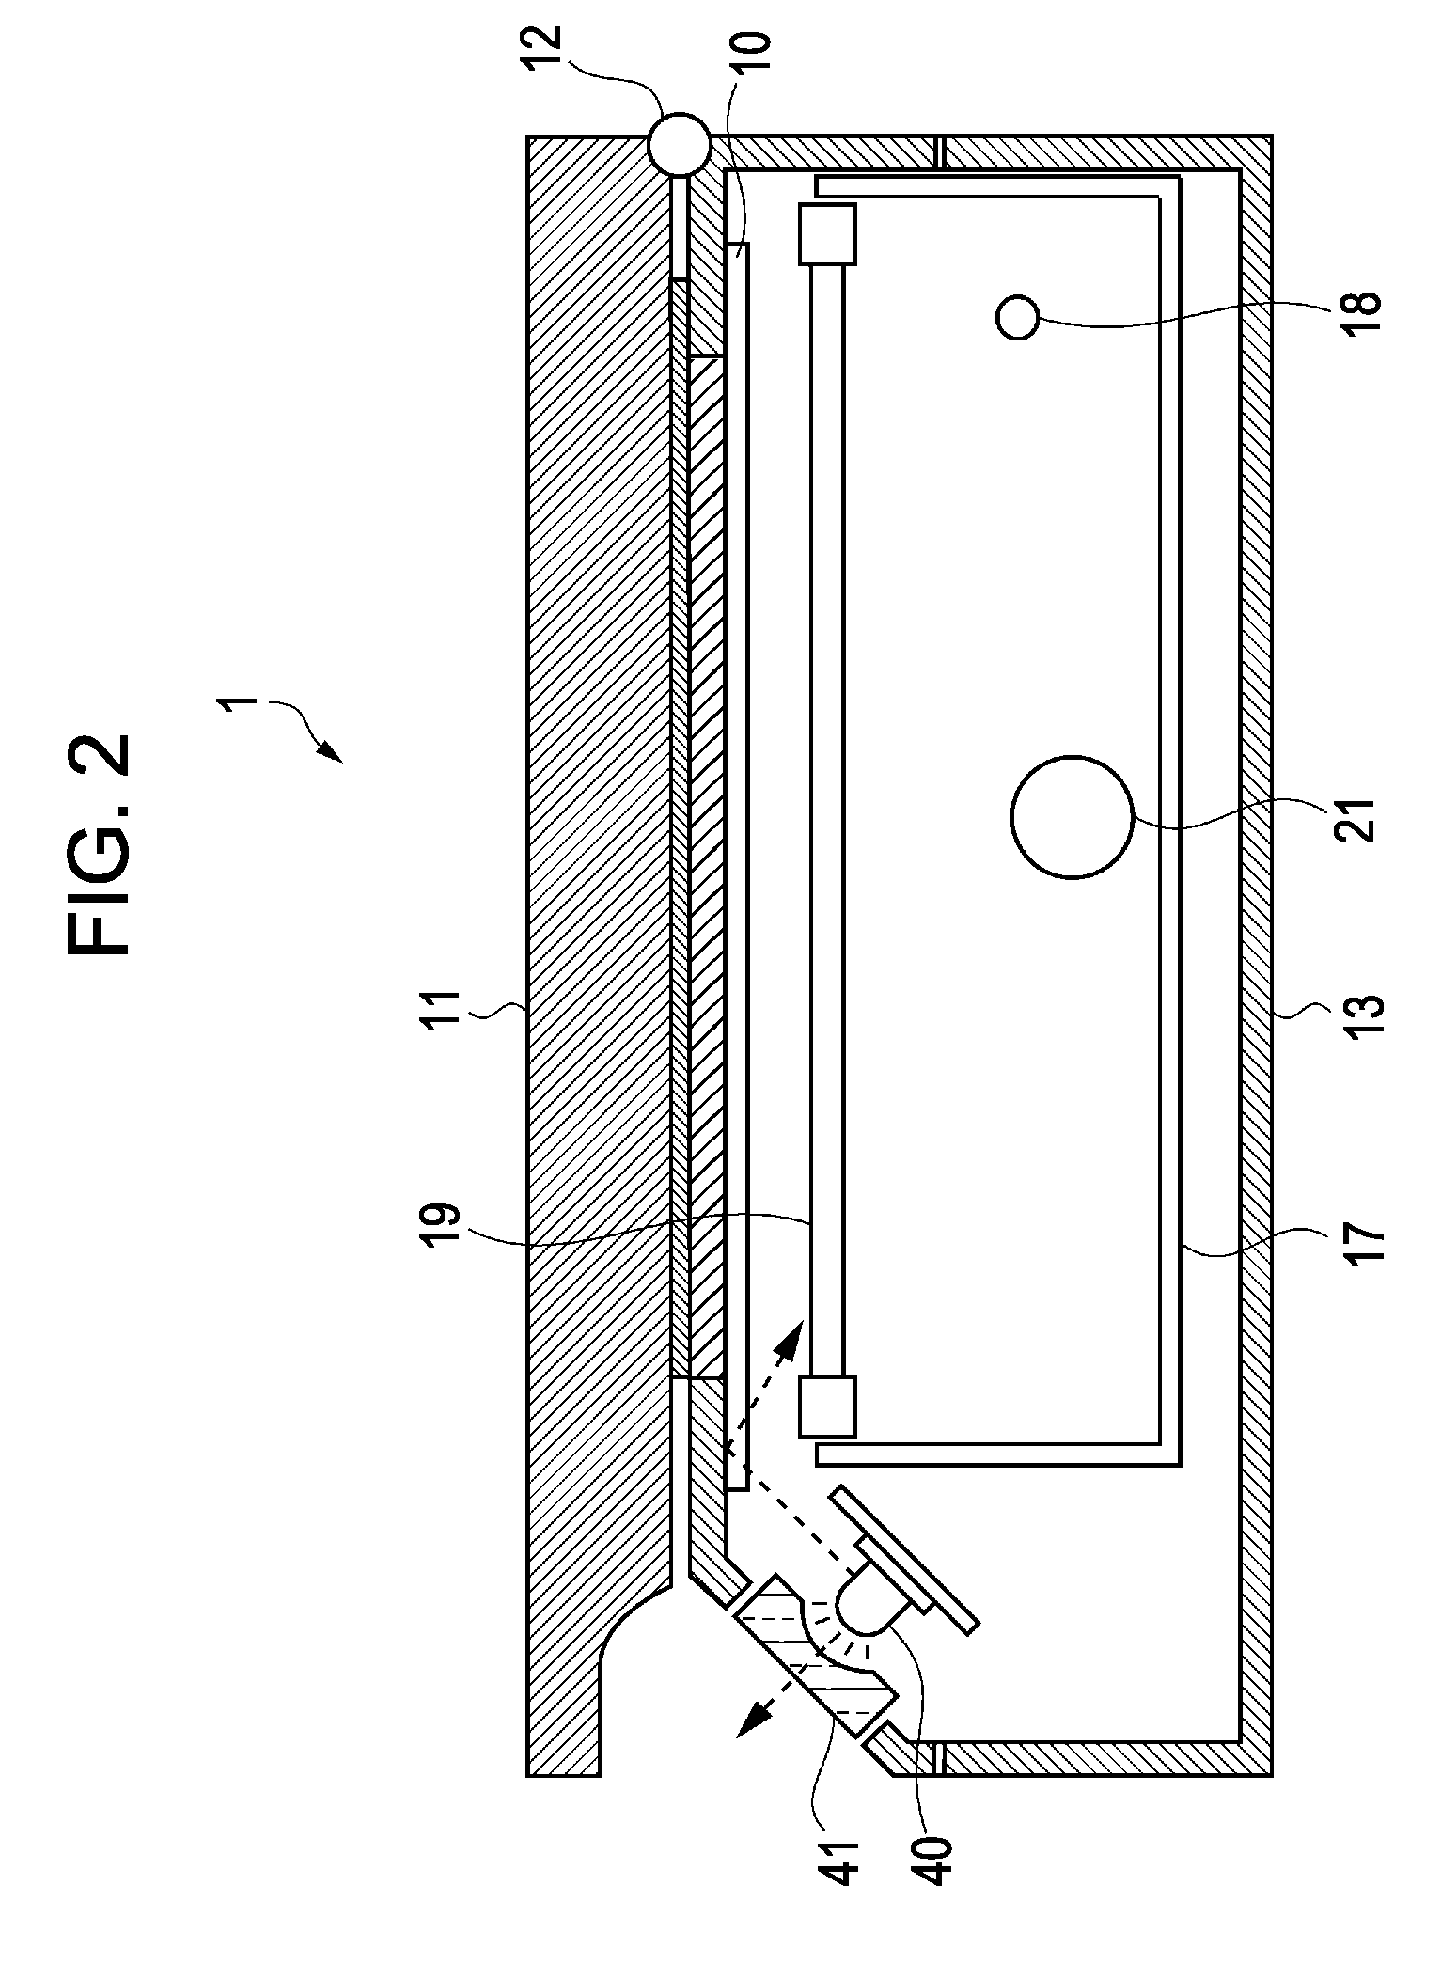 Image scanning apparatus and method of controlling the same